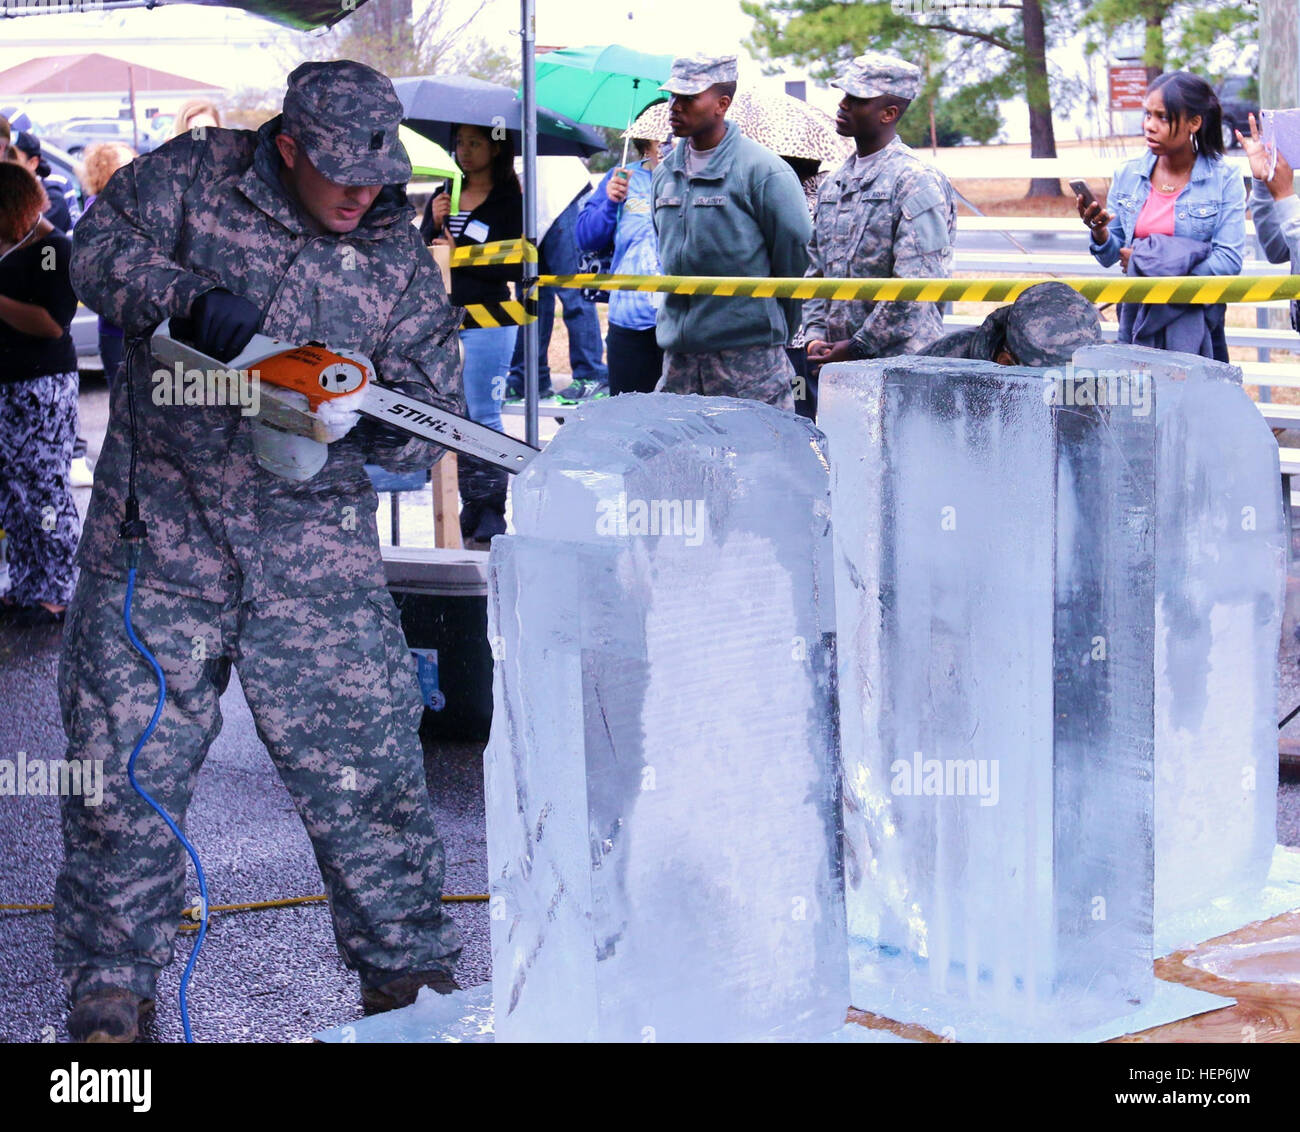 Staff Sgt. Markos Mendoza, a cook assigned to the 257th Transportation Company, cuts into a block of ice with a chainsaw during the ice sculpting competition at the 40th Annual Military Culinary Arts Competitive Training Event held at Fort Lee, Va., March 11. Mendoza and his teammate Spc. Nathanael Dewey, a cook assigned to the 103rd Sustainment Command (Expeditionary), represented the Army Reserve in the ice sculpting competition, and although neither Soldier had ice carving experience they managed to earn a bronze medal for their carving of the characters from the 'Minions,' a popular 3-D co Stock Photo